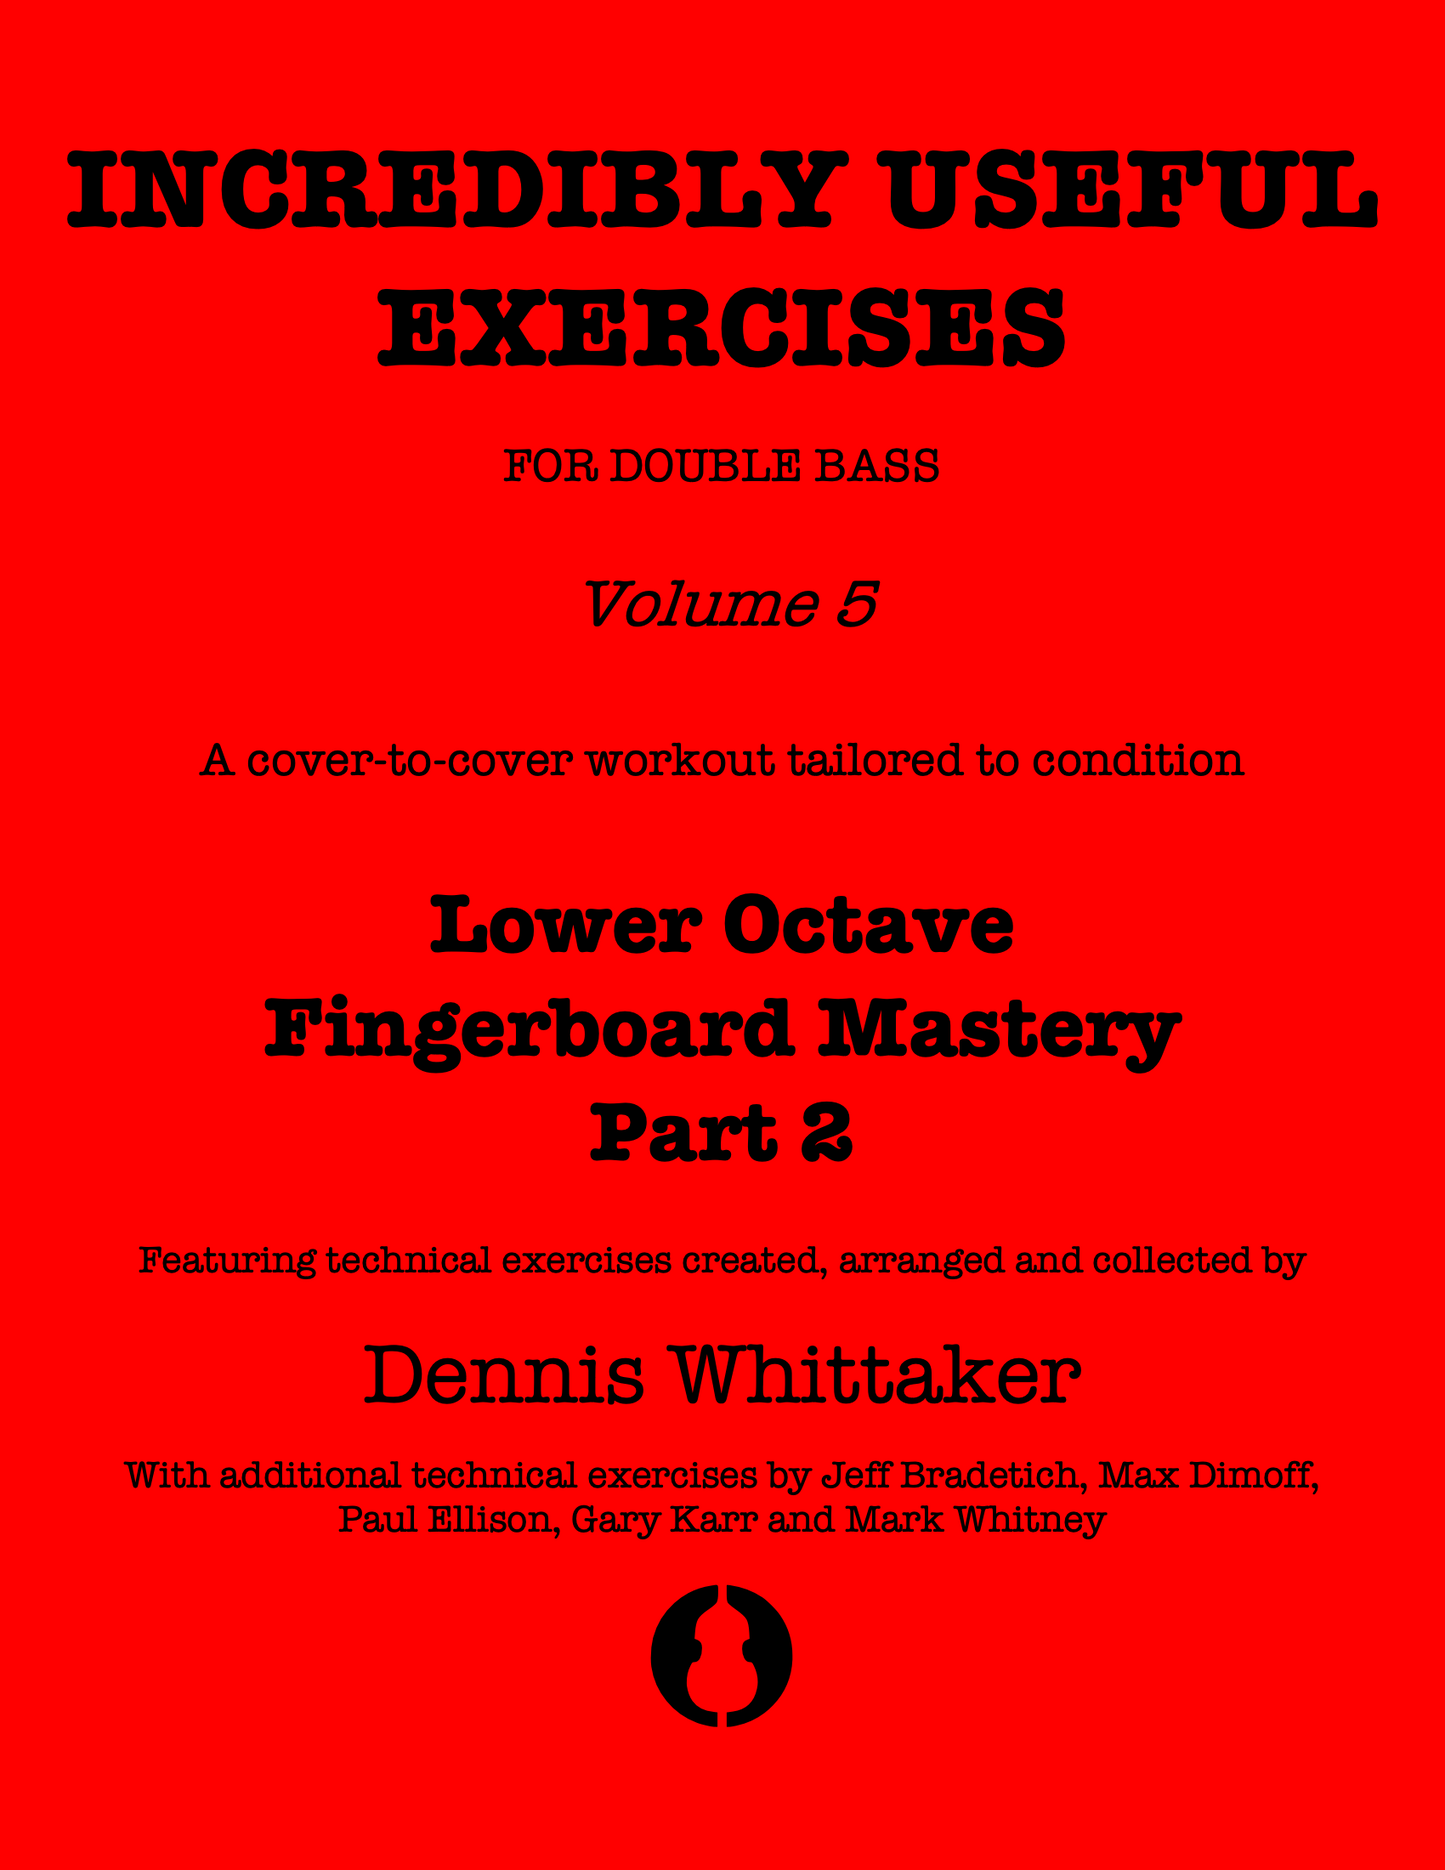 Incredibly Useful Exercises for Double Bass, Vol. 5, Lower Octave Fingerboard Mastery Part 2